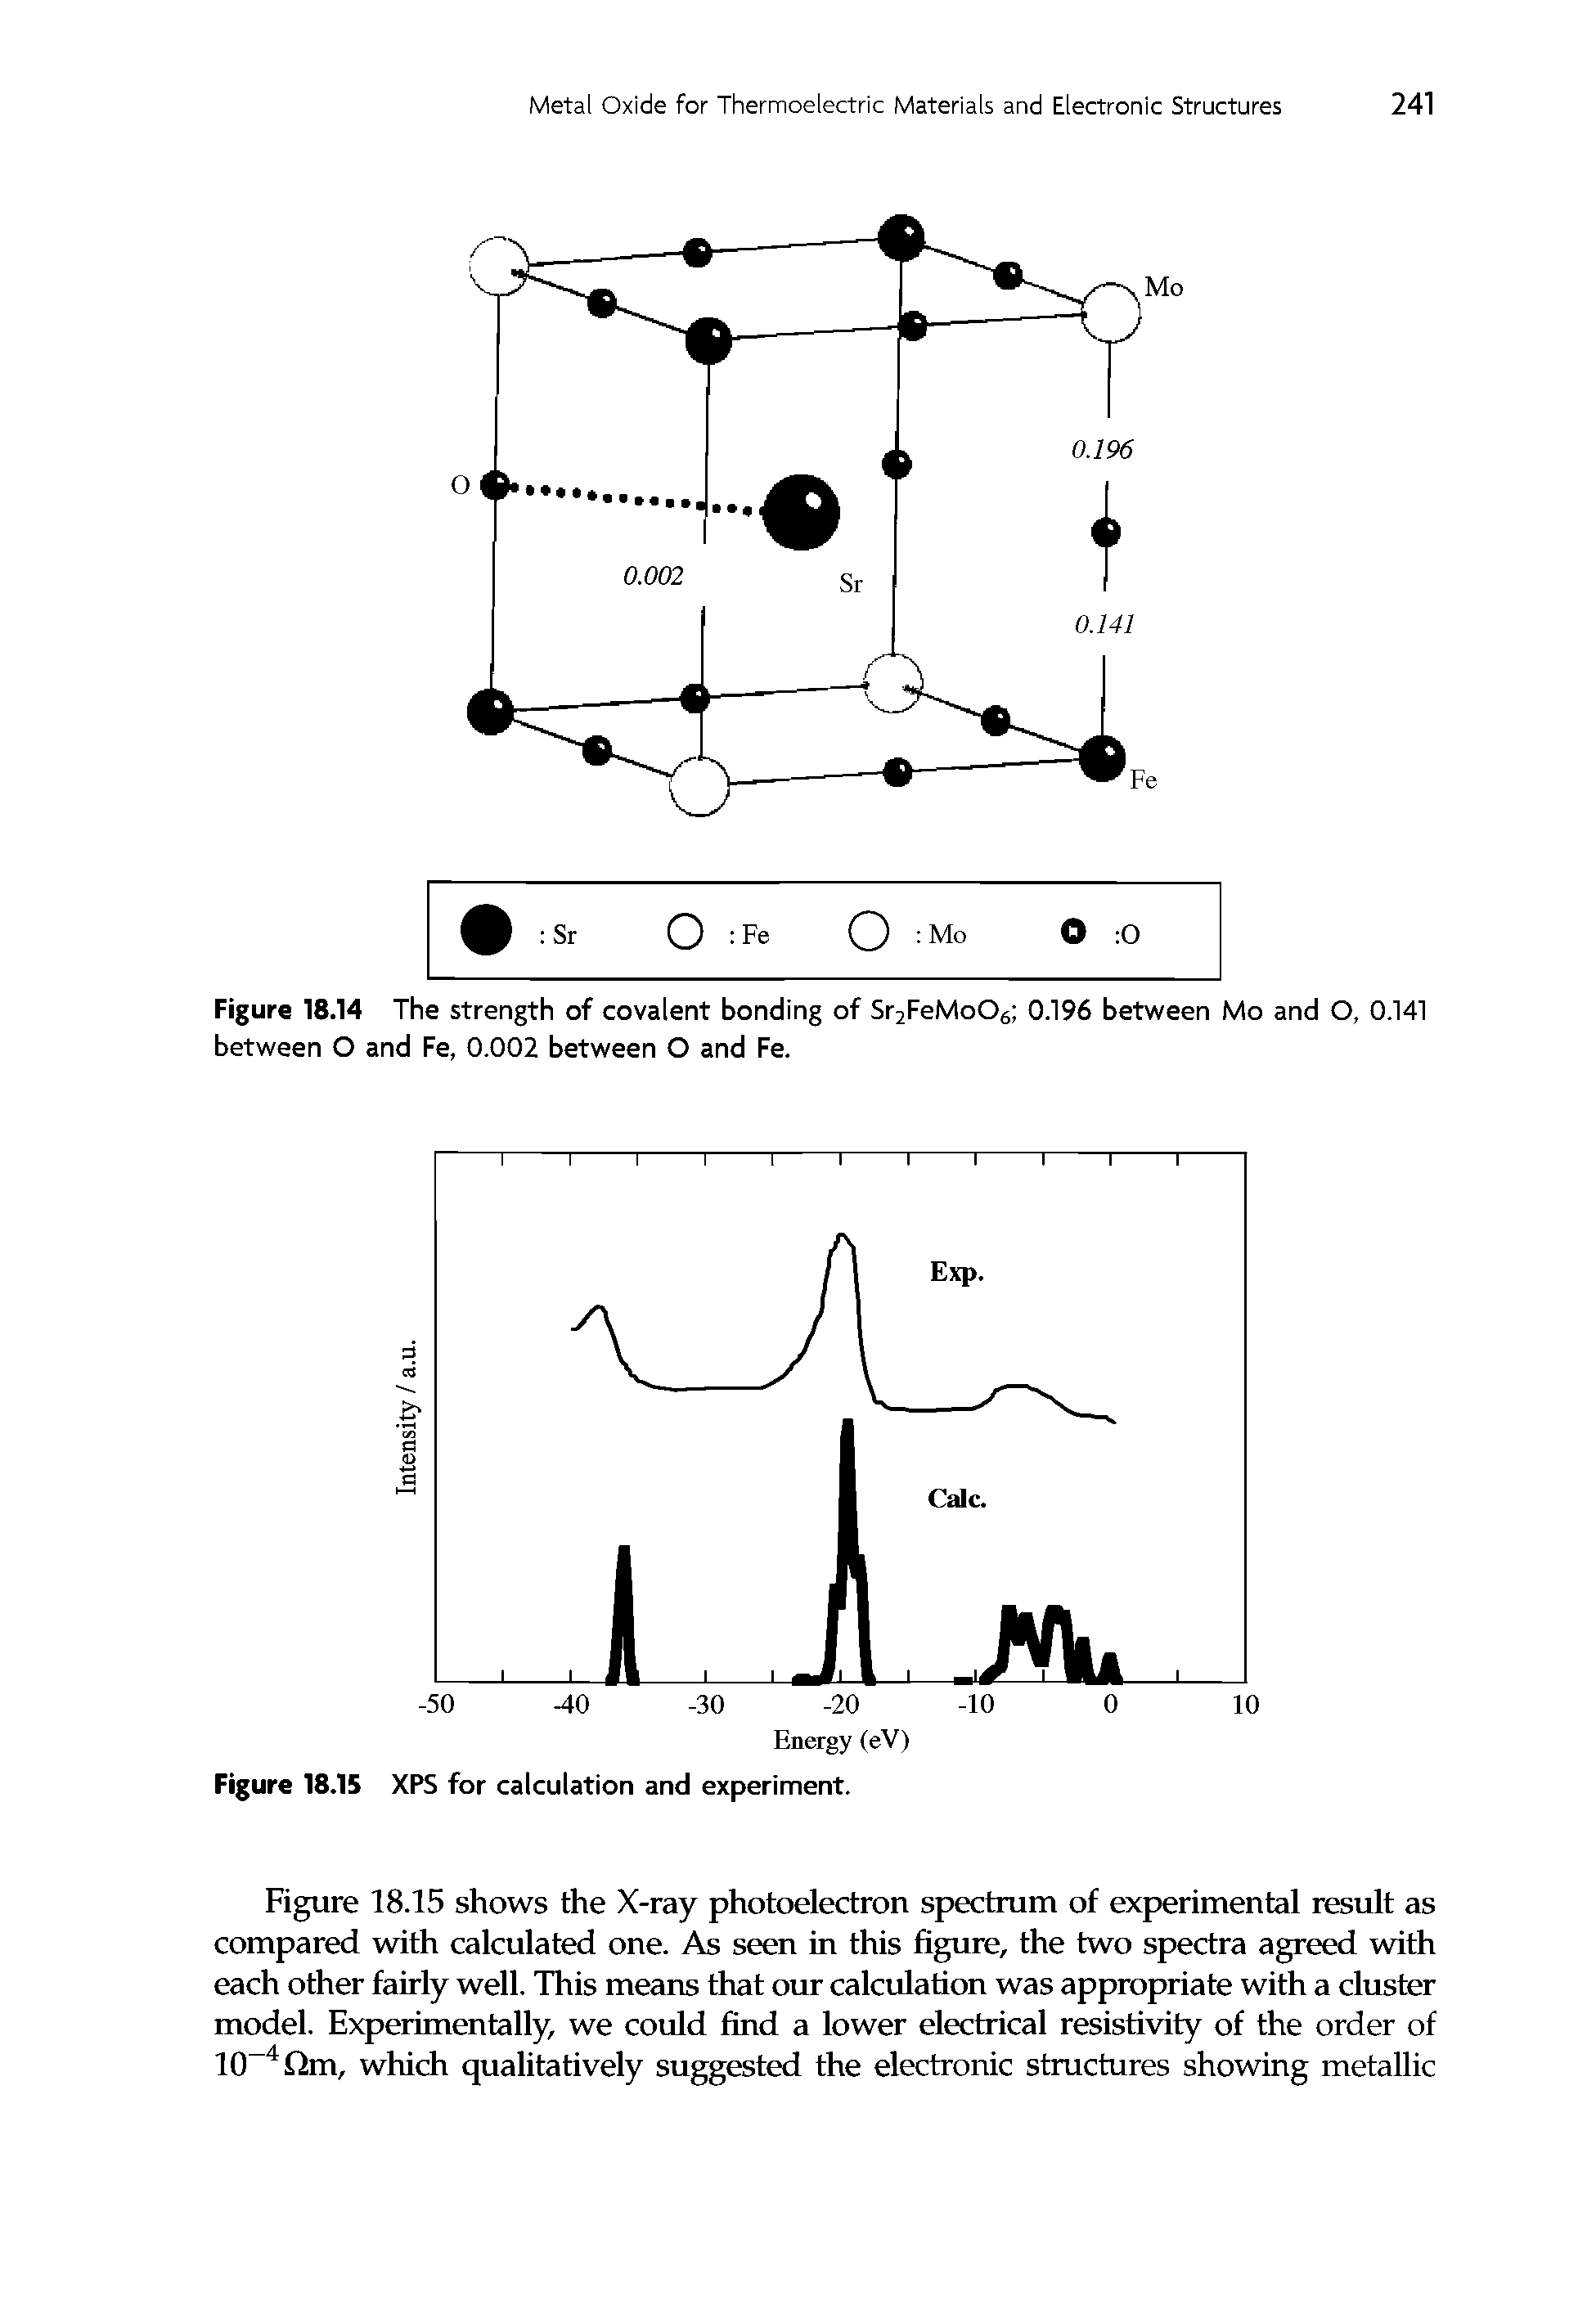 Figure 18.14 The strength of covalent bonding of Sr2FeMo06 0.196 between Mo and O, 0.141 between O and Fe, 0.002 between O and Fe.